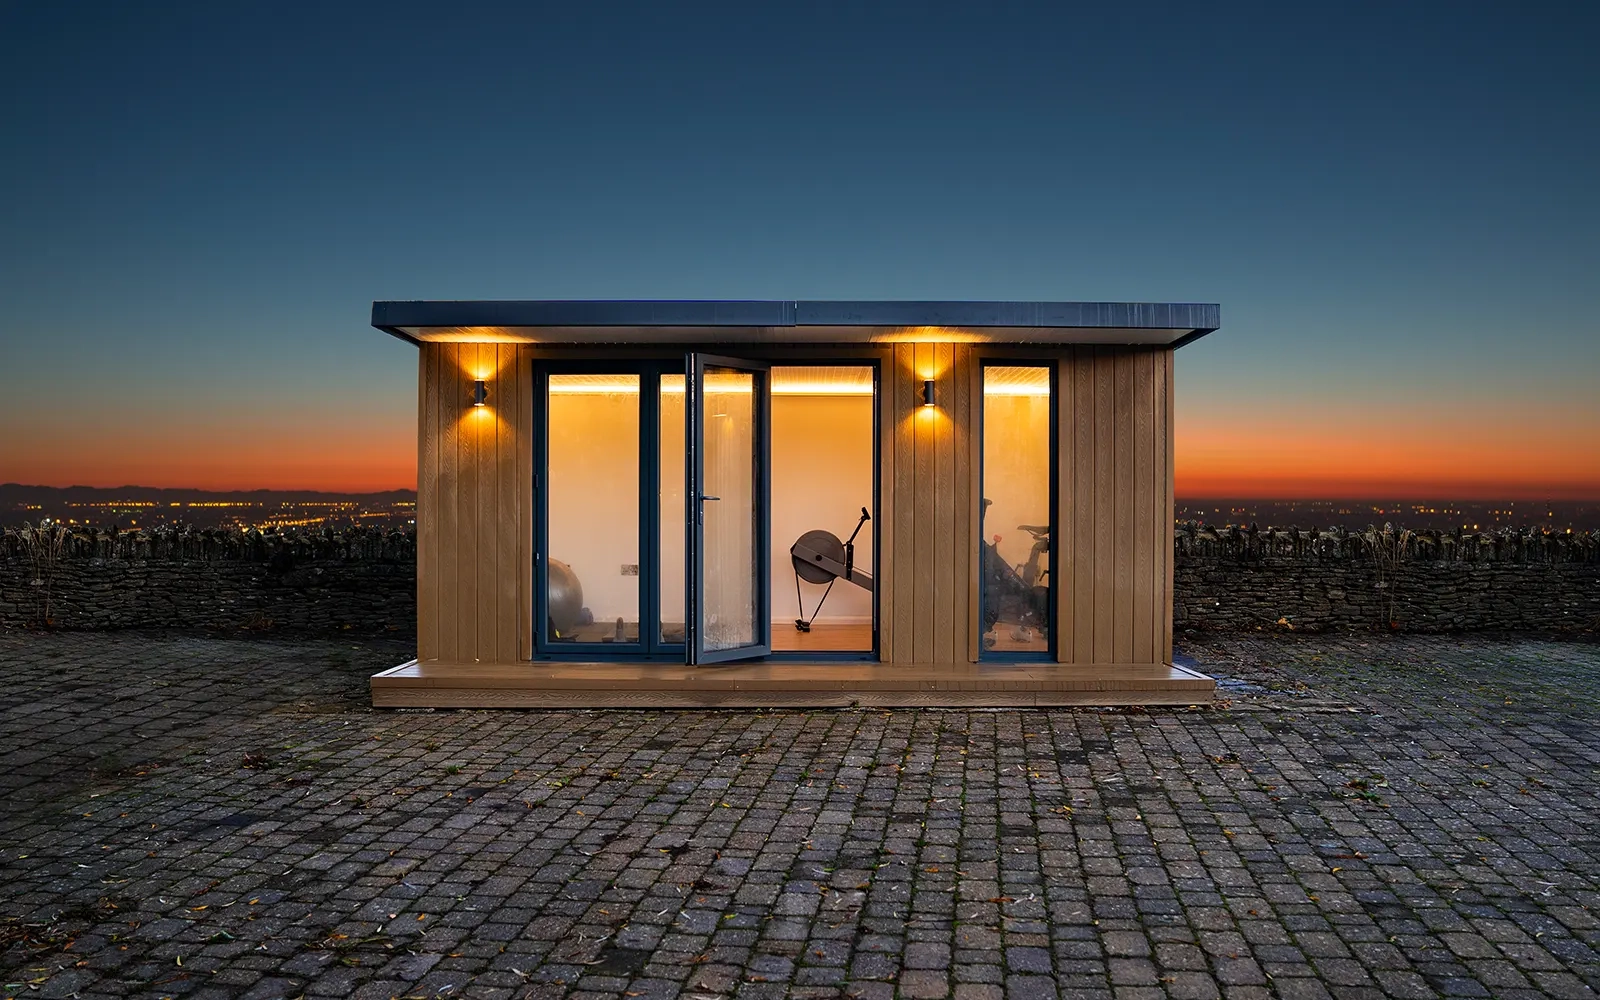 A garden room front on with a paved courtyard at dusk